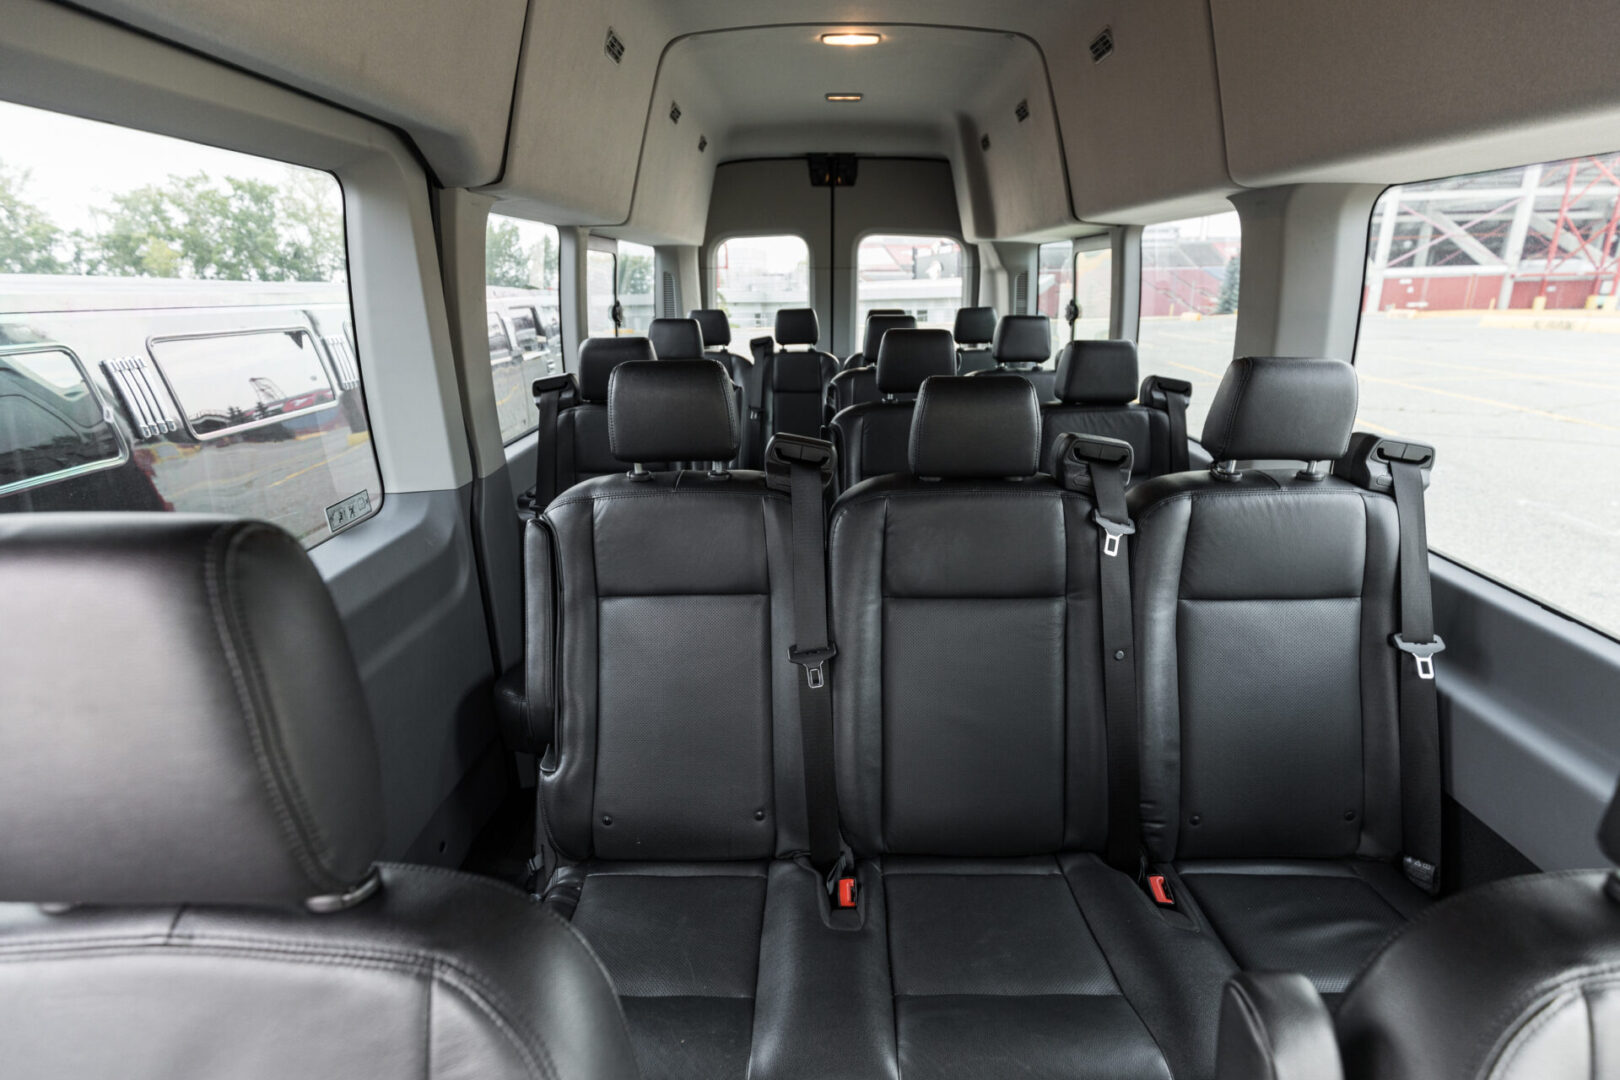 An interior of a large van with black seats